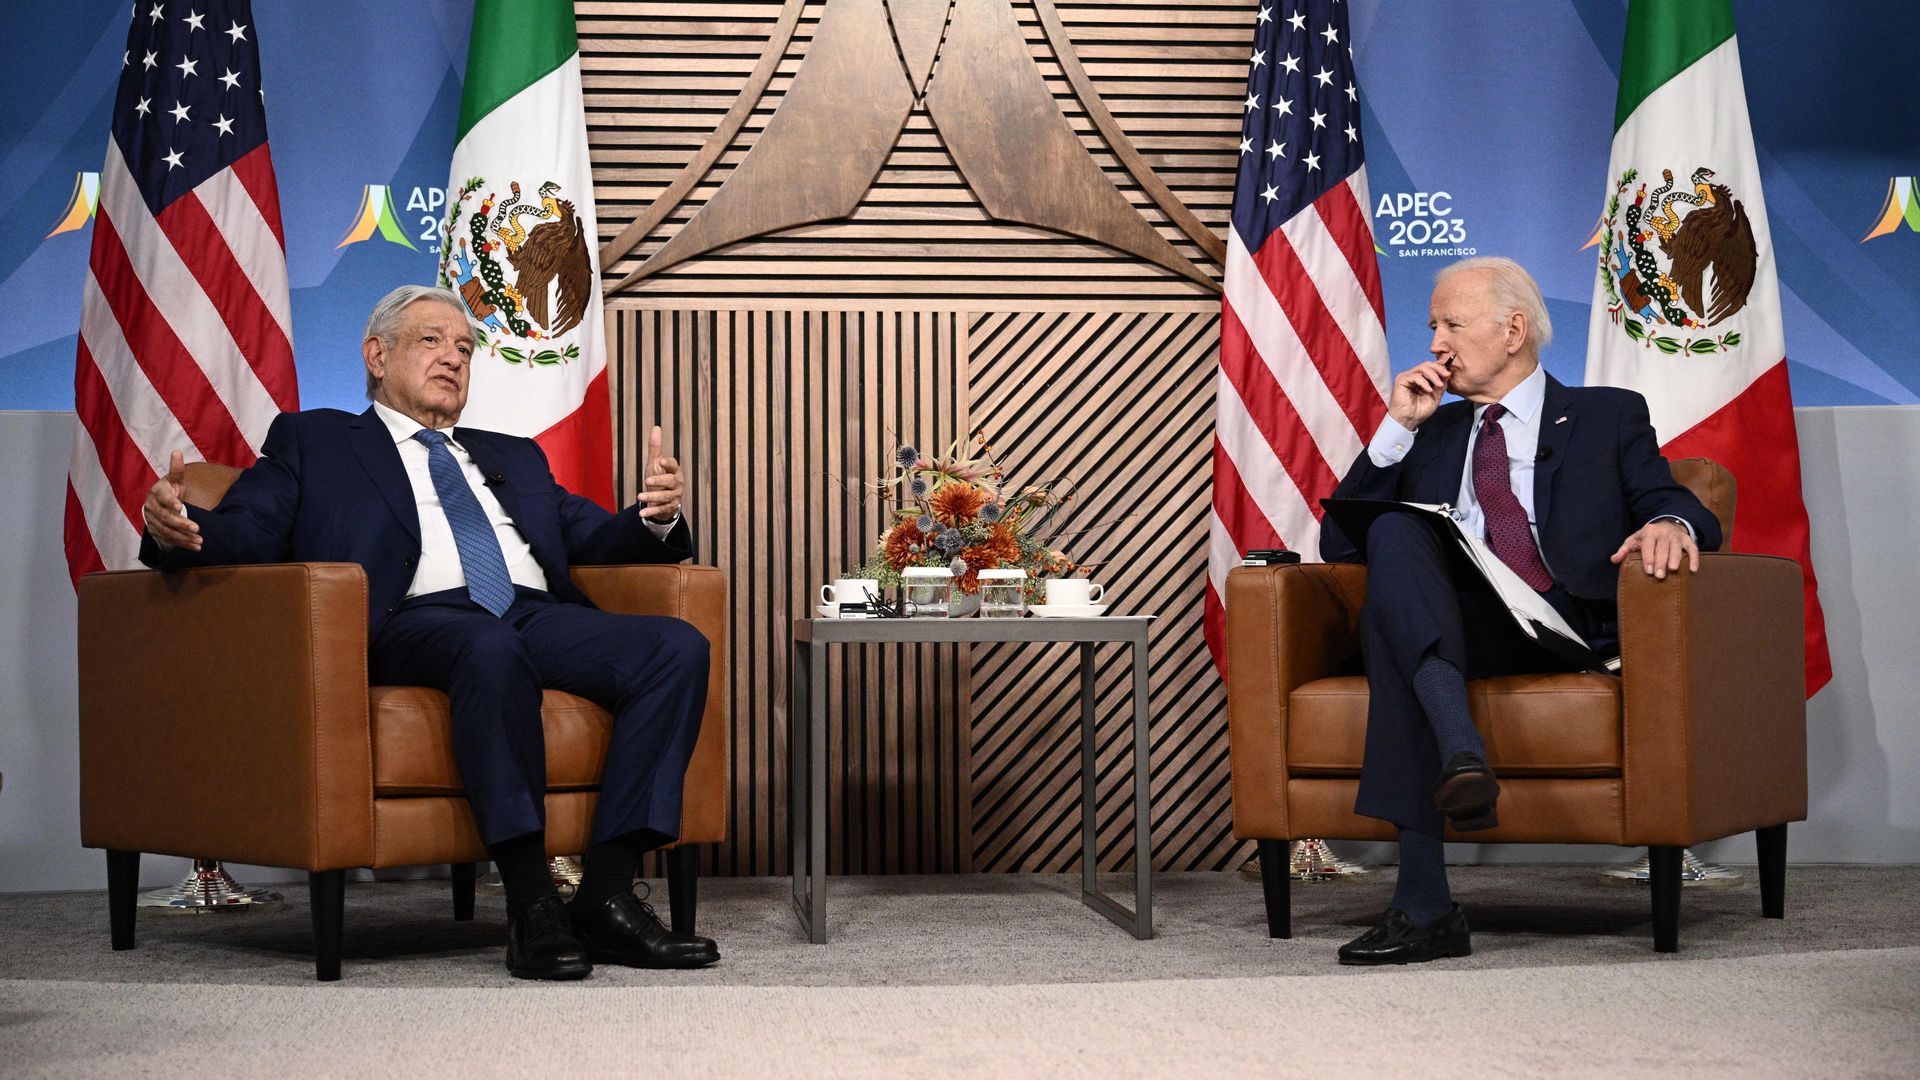 Joe Biden (R) looks on as Mexican President Andres Manuel Lopez Obrador speaks during a bilateral meeting 